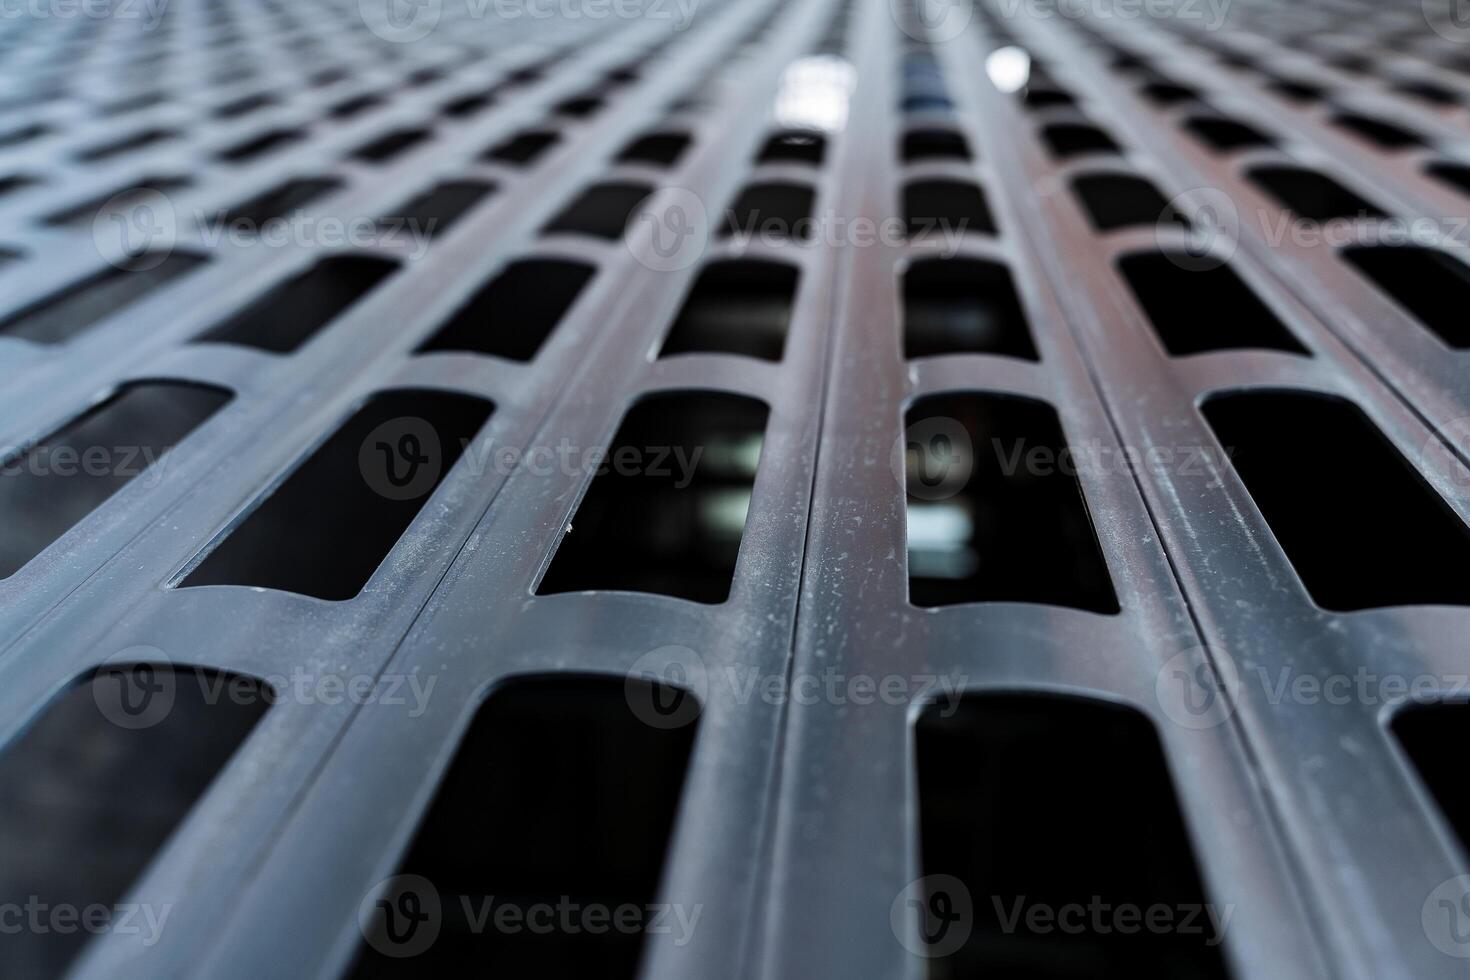 black grid with large cells, background image, blurred background photo